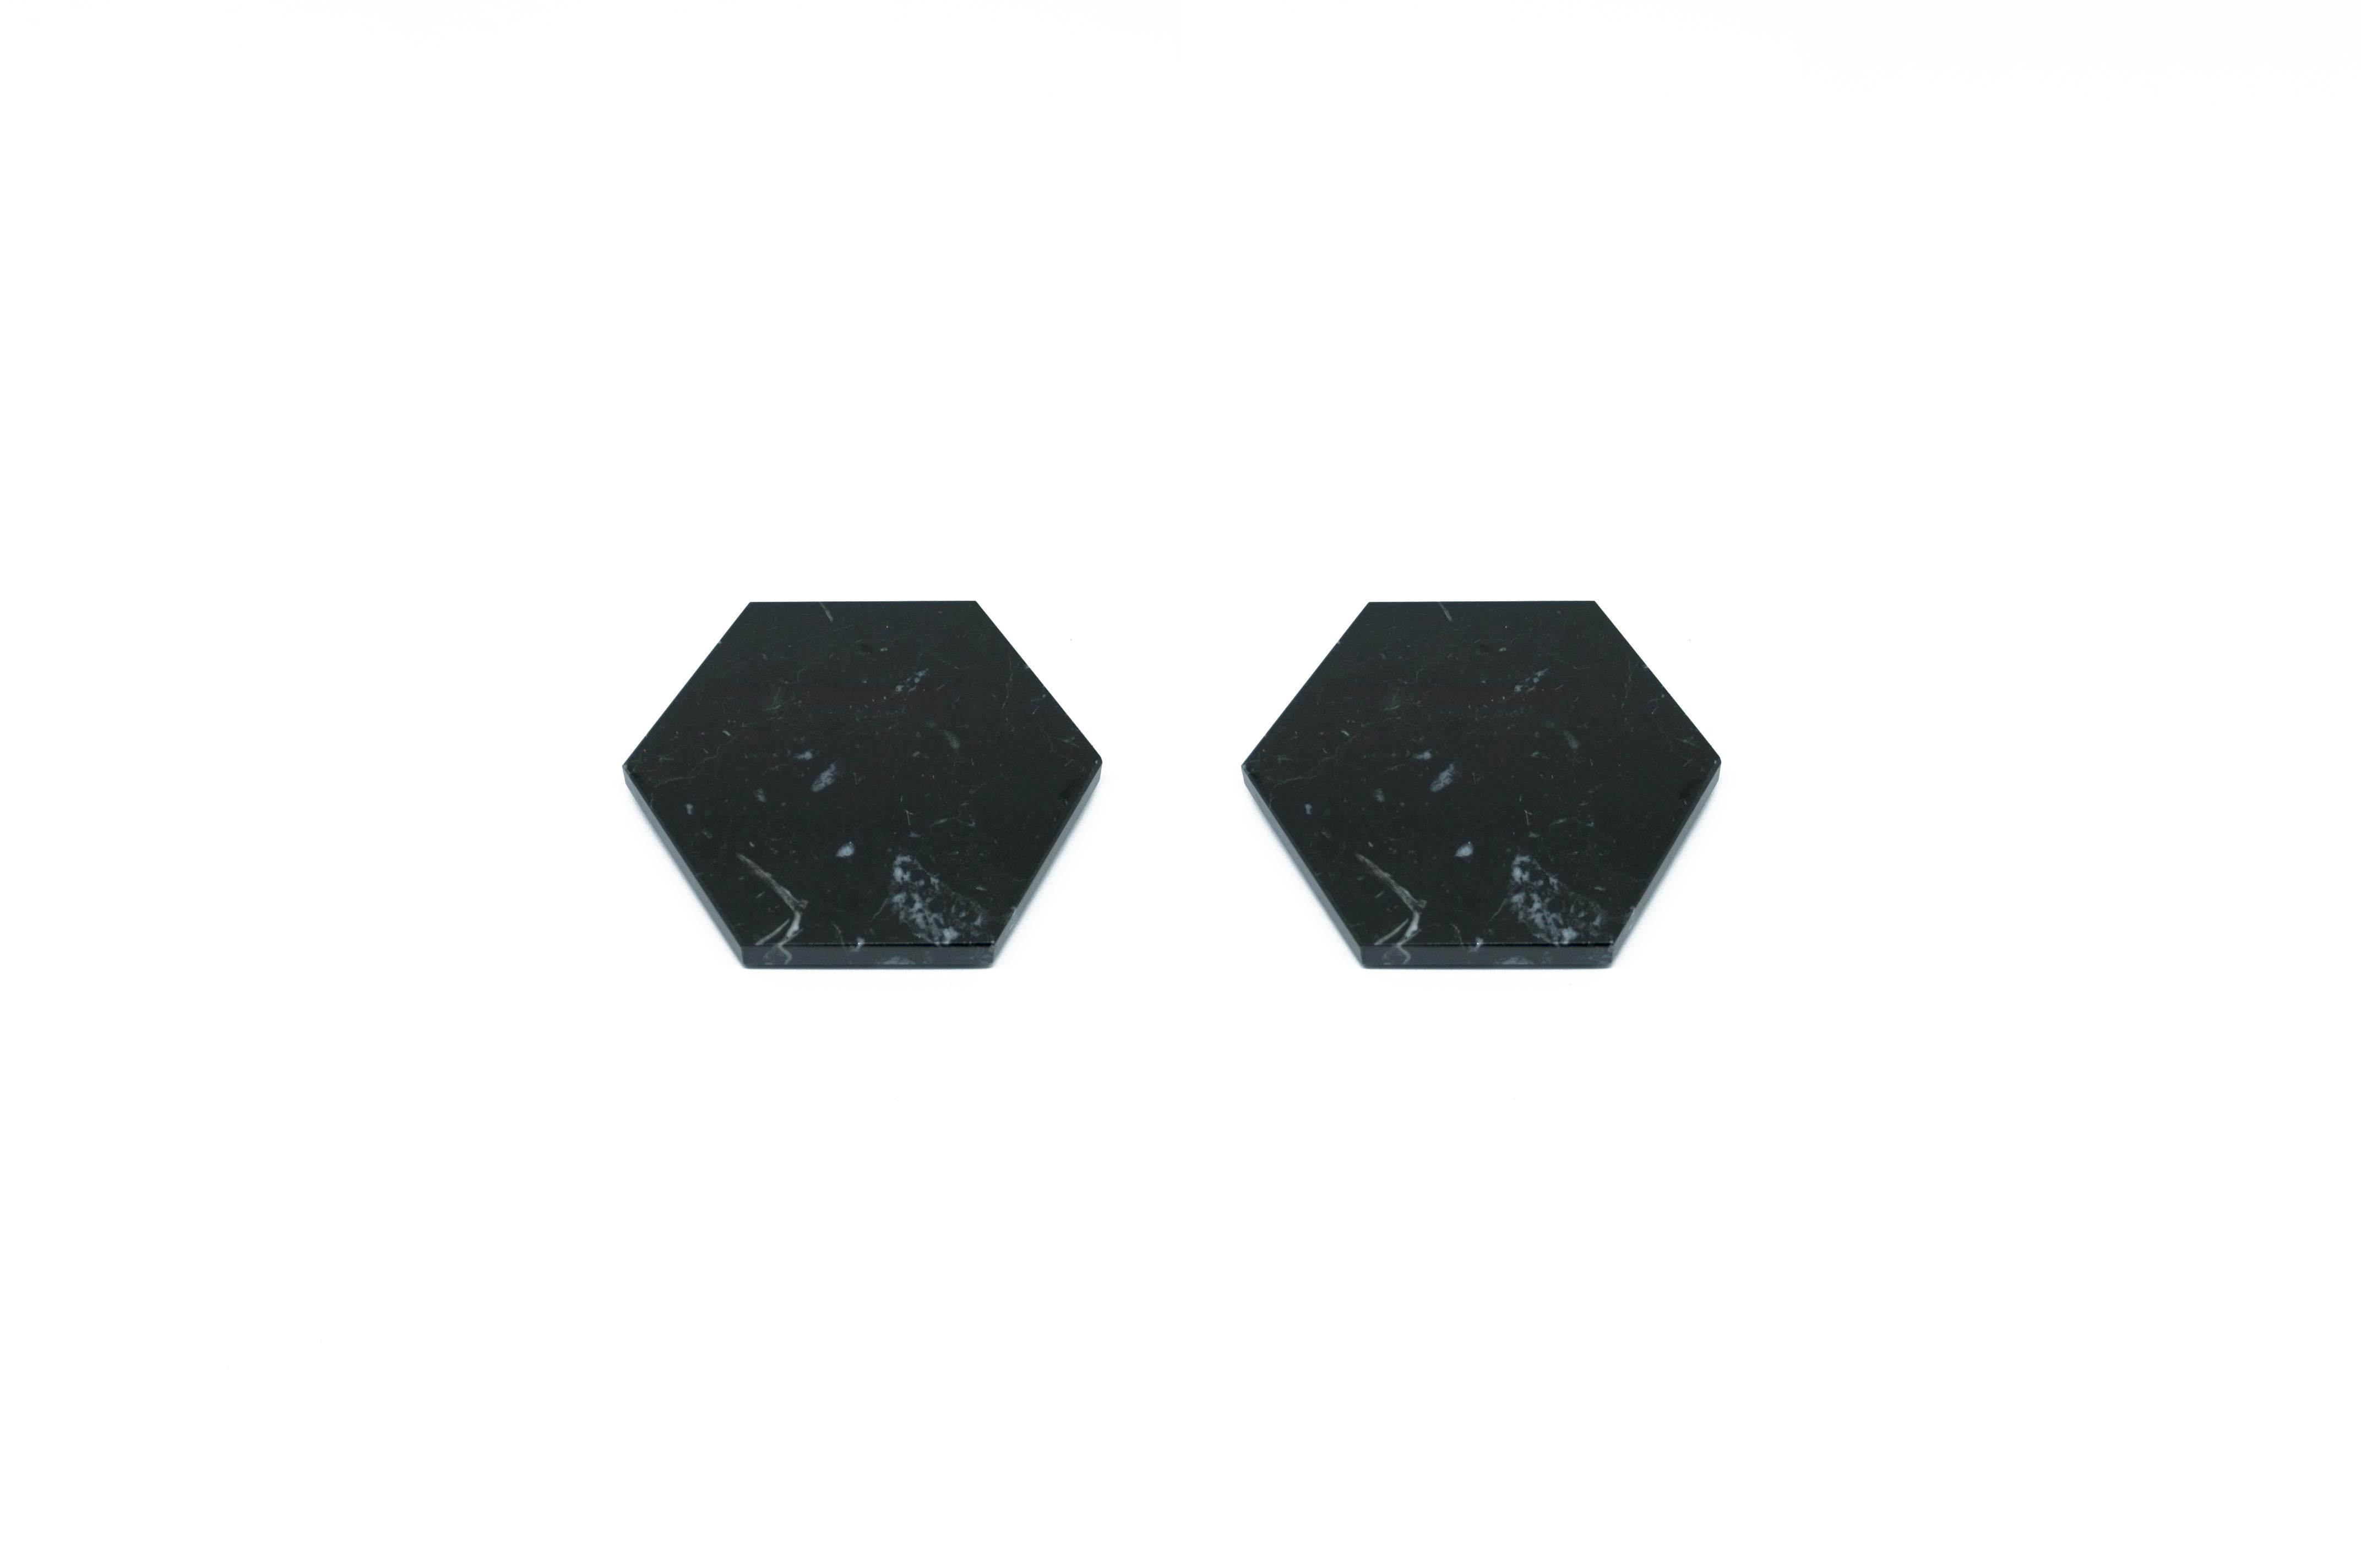 Set of 2 hexagonal shape black marble coasters with cork underneath. Each piece is in a way unique (every marble block is different in veins and shades) and handmade by Italian artisans specialized over generations in processing marble. Slight